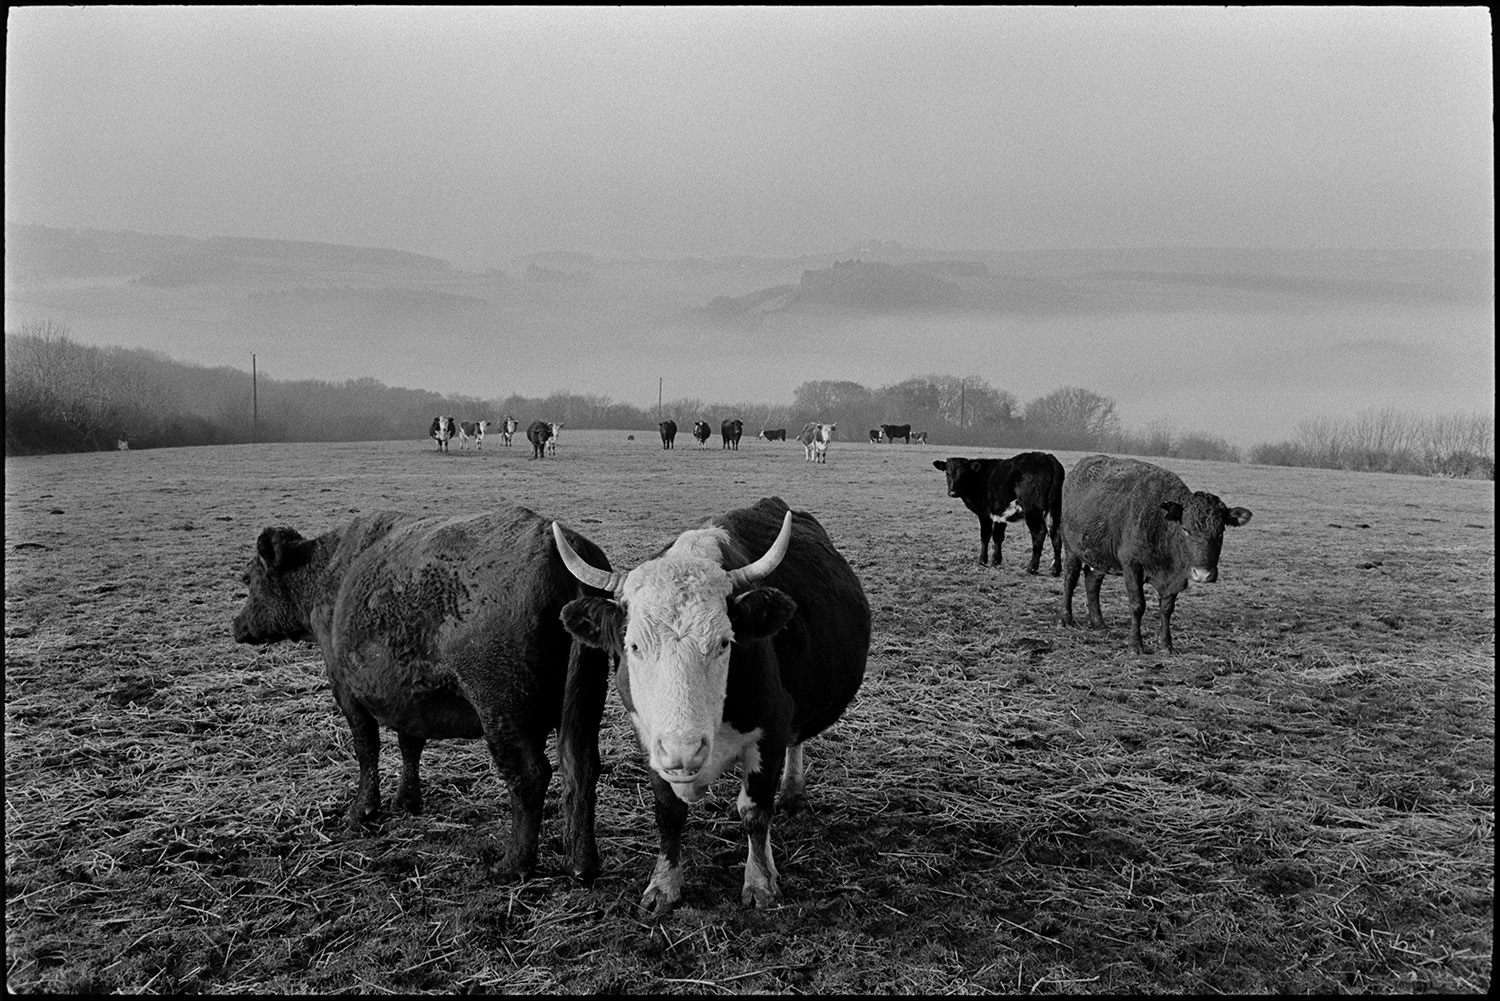 Horned cattle in frosty field. 
[Cattle, some with horns, in a frosty field at Ashwell, Dolton. Mist covered trees can be seen in the background.]